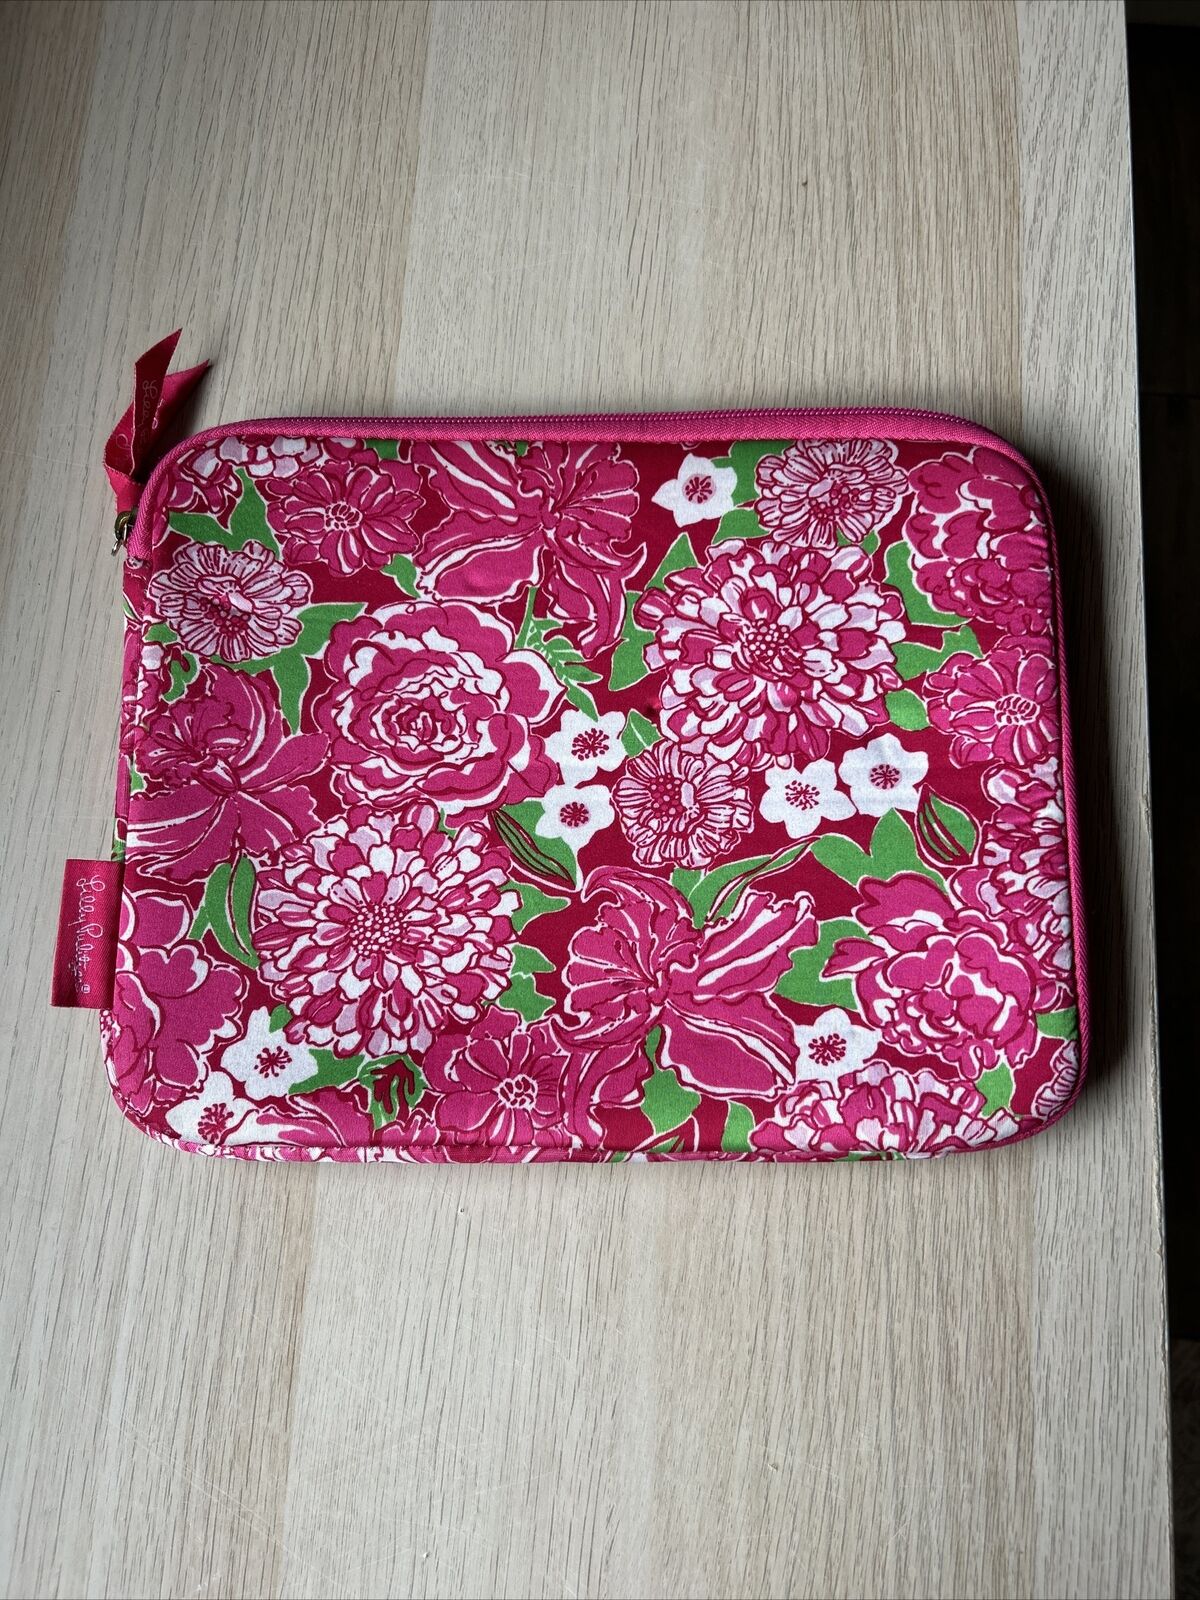 Lilly Pulitzer HOT PINK Neoprene Case 8” X 10” For iPad Mini Or Any Small Tablet